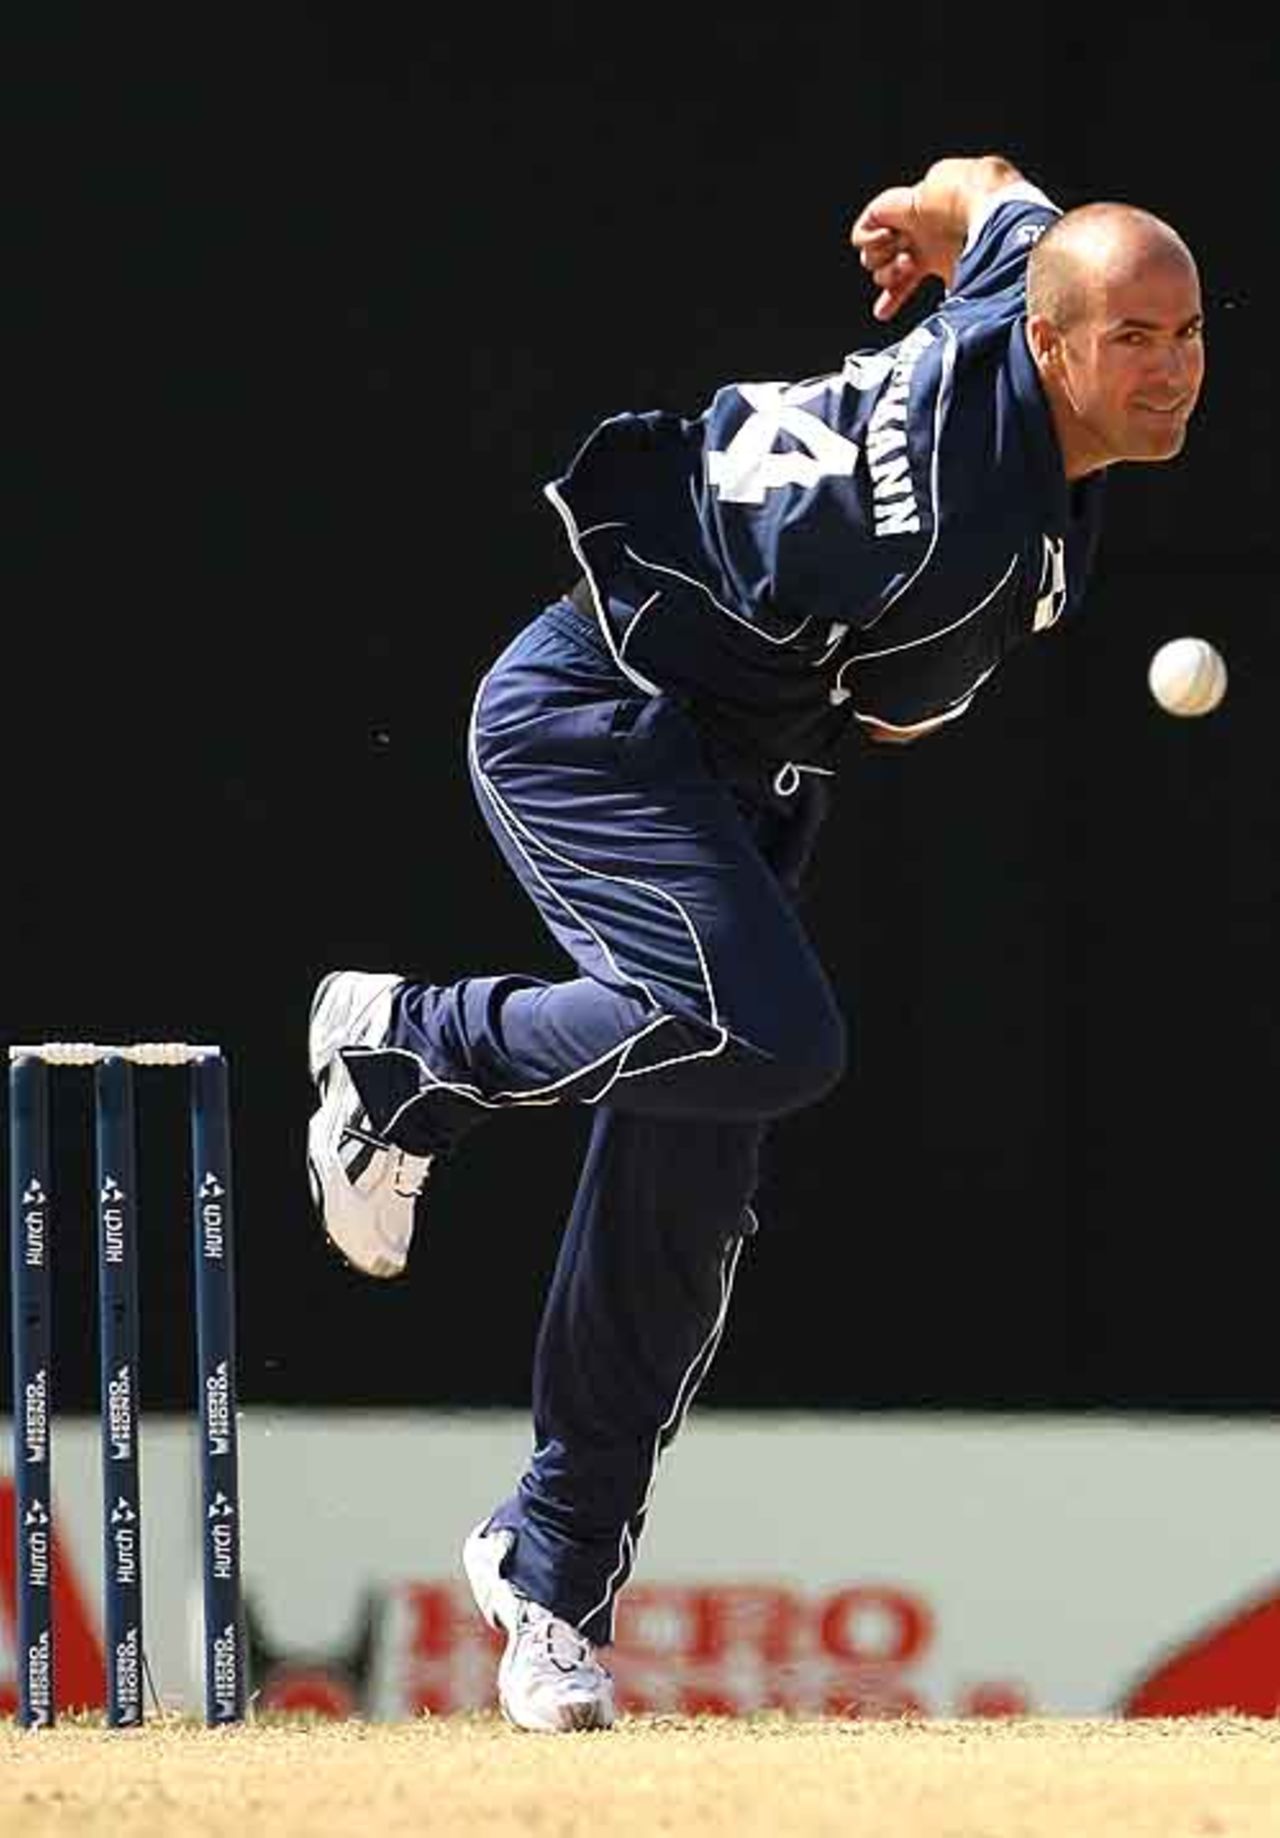 Scotland's opening bowler Paul Hoffmann in action, Australia v Scotland, Group A, Basseterre, 2007 World Cup, March 14, 2007